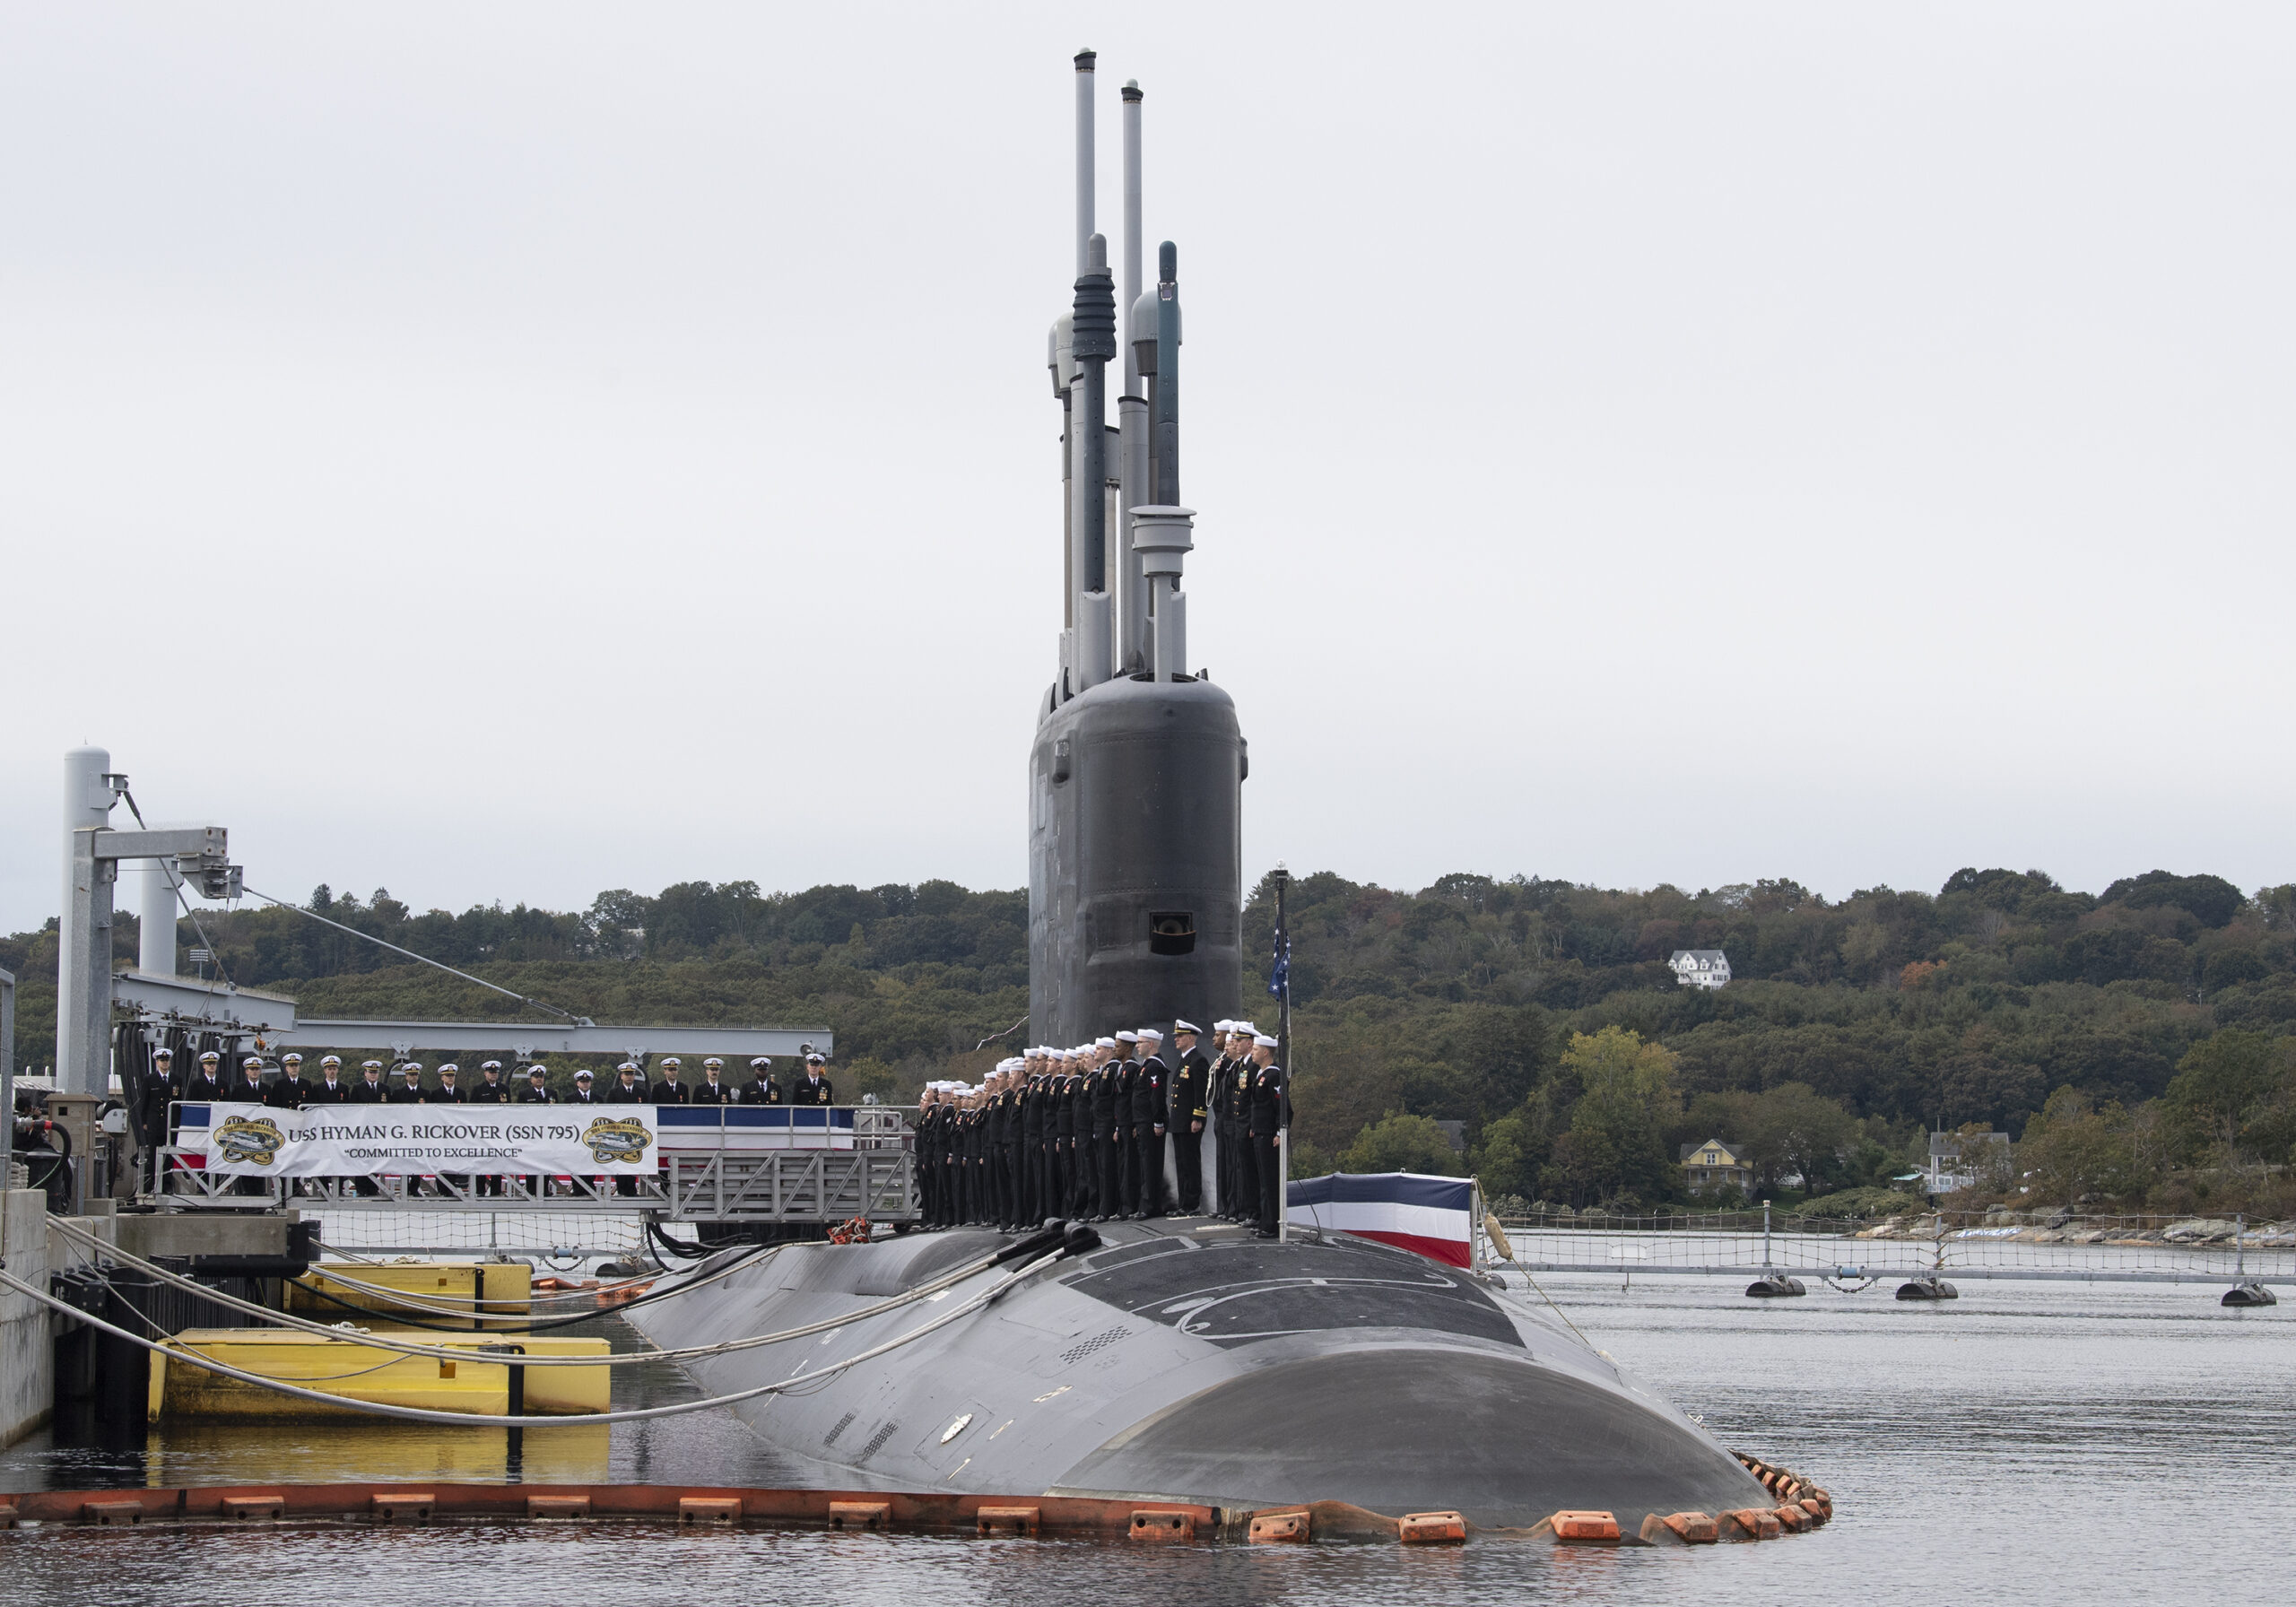 231014-N-GR655-1541 GROTON, Conn. (October 14, 2023) – Crewmembers of USS Hyman G. Rickover (SSN 795) perform a ceremonial manning of the ship during a commissioning ceremony at Naval Submarine Base New London in Groton, Connecticut on October 14, 2023. SSN 795, the second U.S. Navy submarine to commemorate the “father of the nuclear Navy” Adm. Hyman G. Rickover, operates under Submarine Squadron (SUBRON) FOUR. Whose primary mission is to provide attack submarines that are ready, willing, and able to meet the unique challenges of undersea combat and deployed operations in un unforgiving environments across the globe. (U.S. Navy photo by John Narewski)